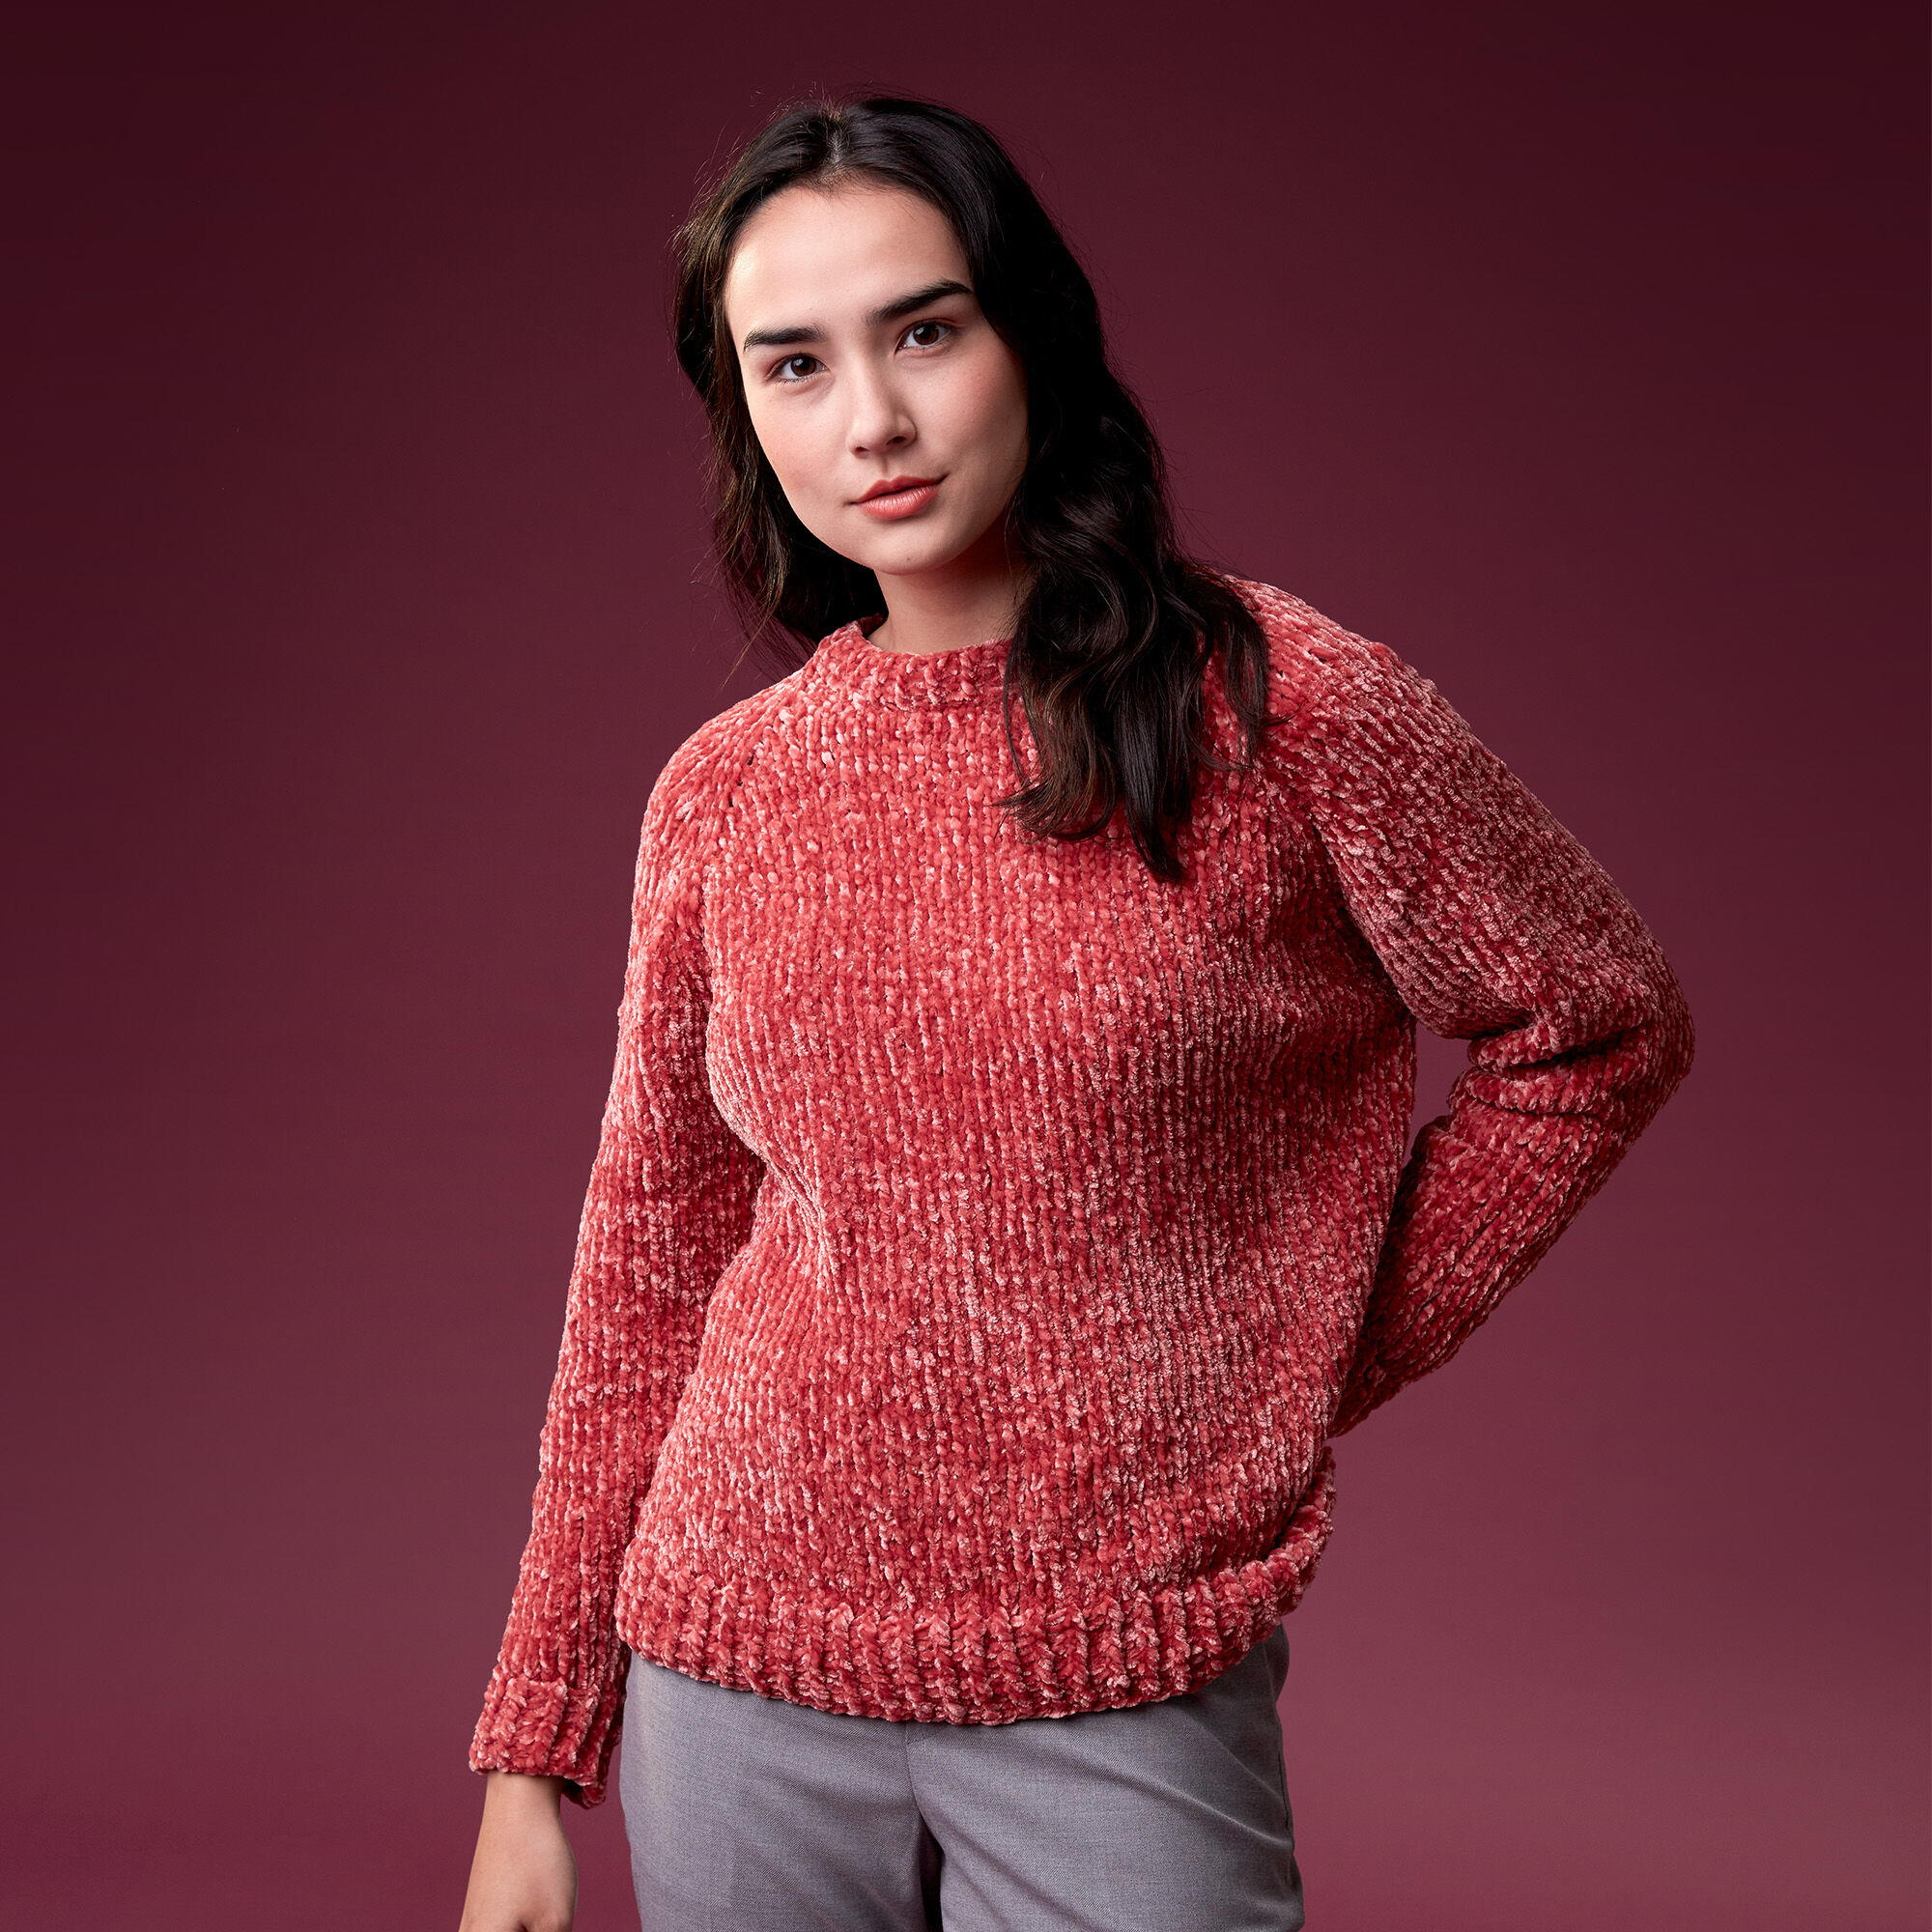 Easy Top-Down Knit Sweater Pattern